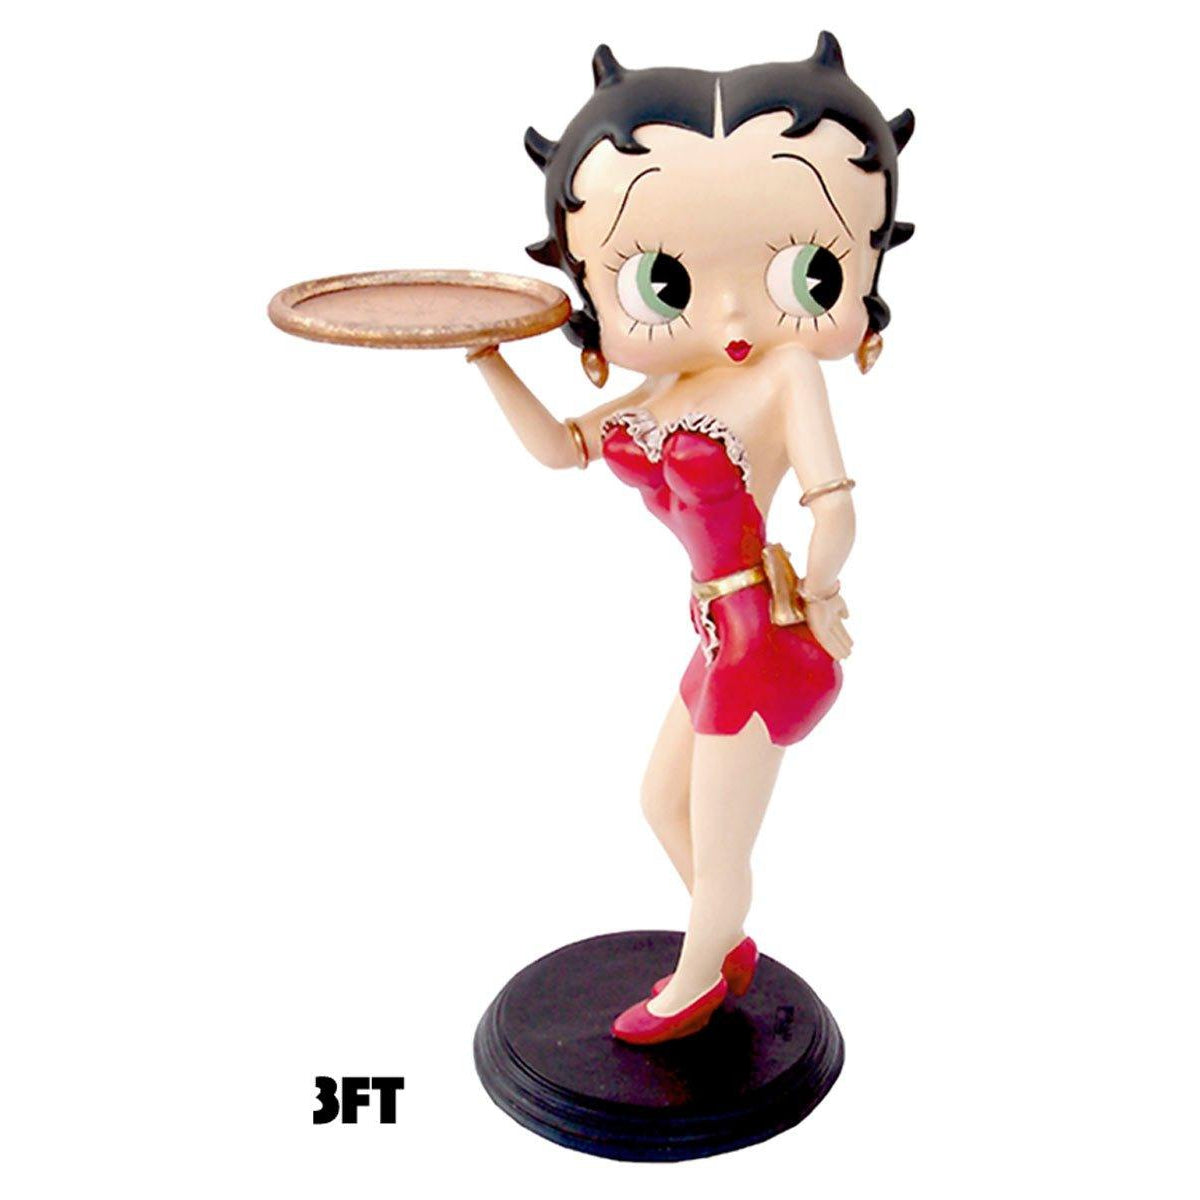 Betty Boop Waitress 3ft - Gallery Gifts Online 